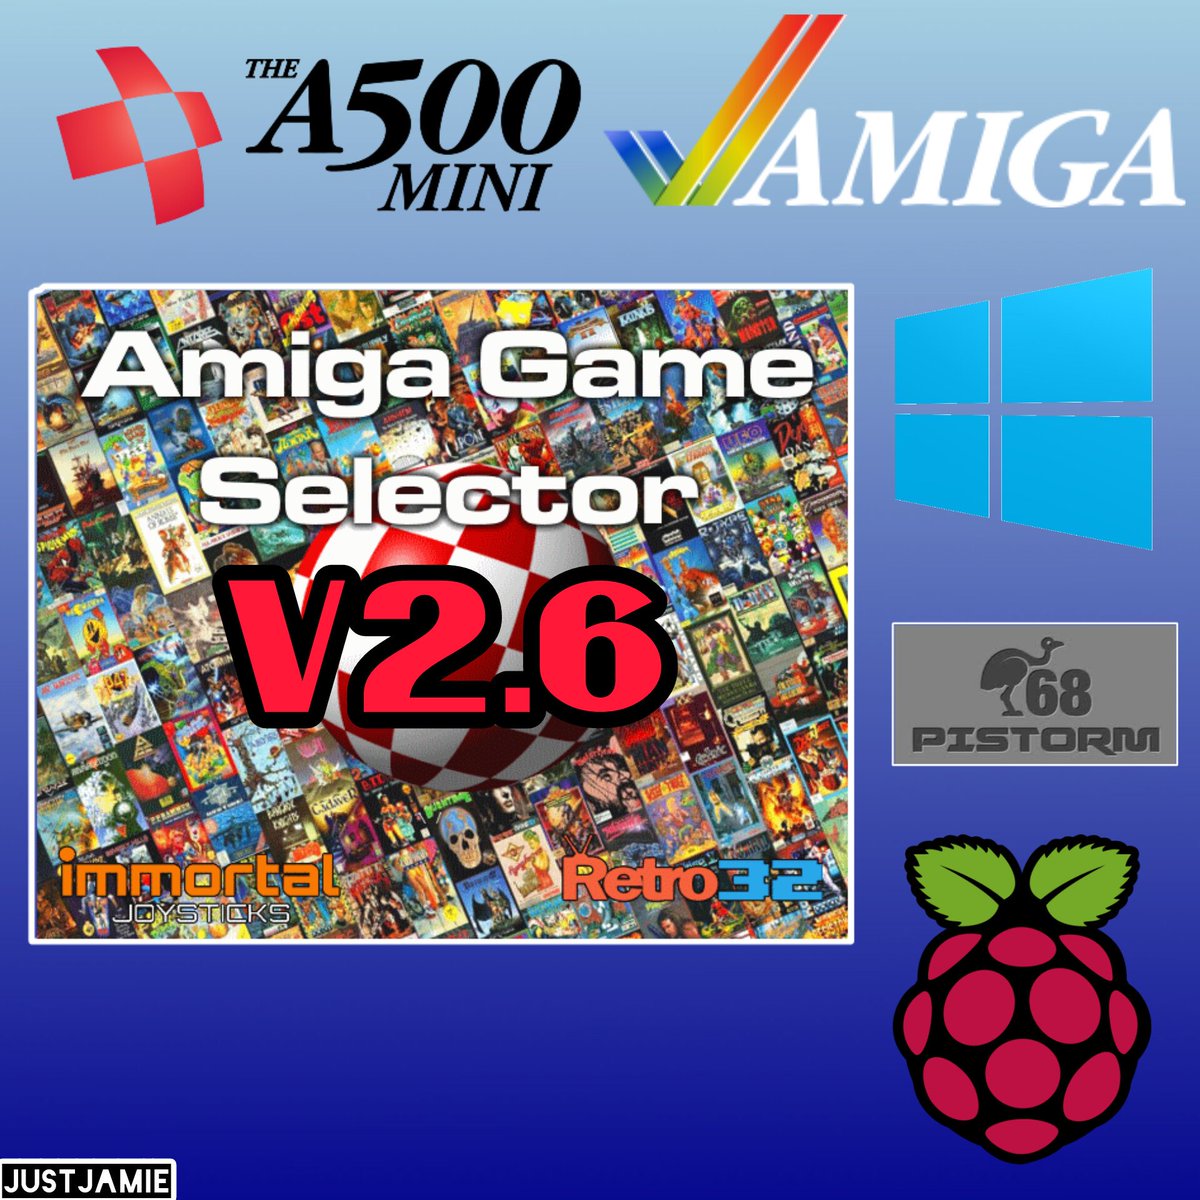 Today I am going to show you how to setup the awesome Amiga Game Selector V2.6 which is now available for multiple platforms. This package features thousands of Amiga games in WHDLoad. youtu.be/JOkaPc4P1LE #amiga #AGS2024 #amigagameselector #commodoreamiga #justjamie